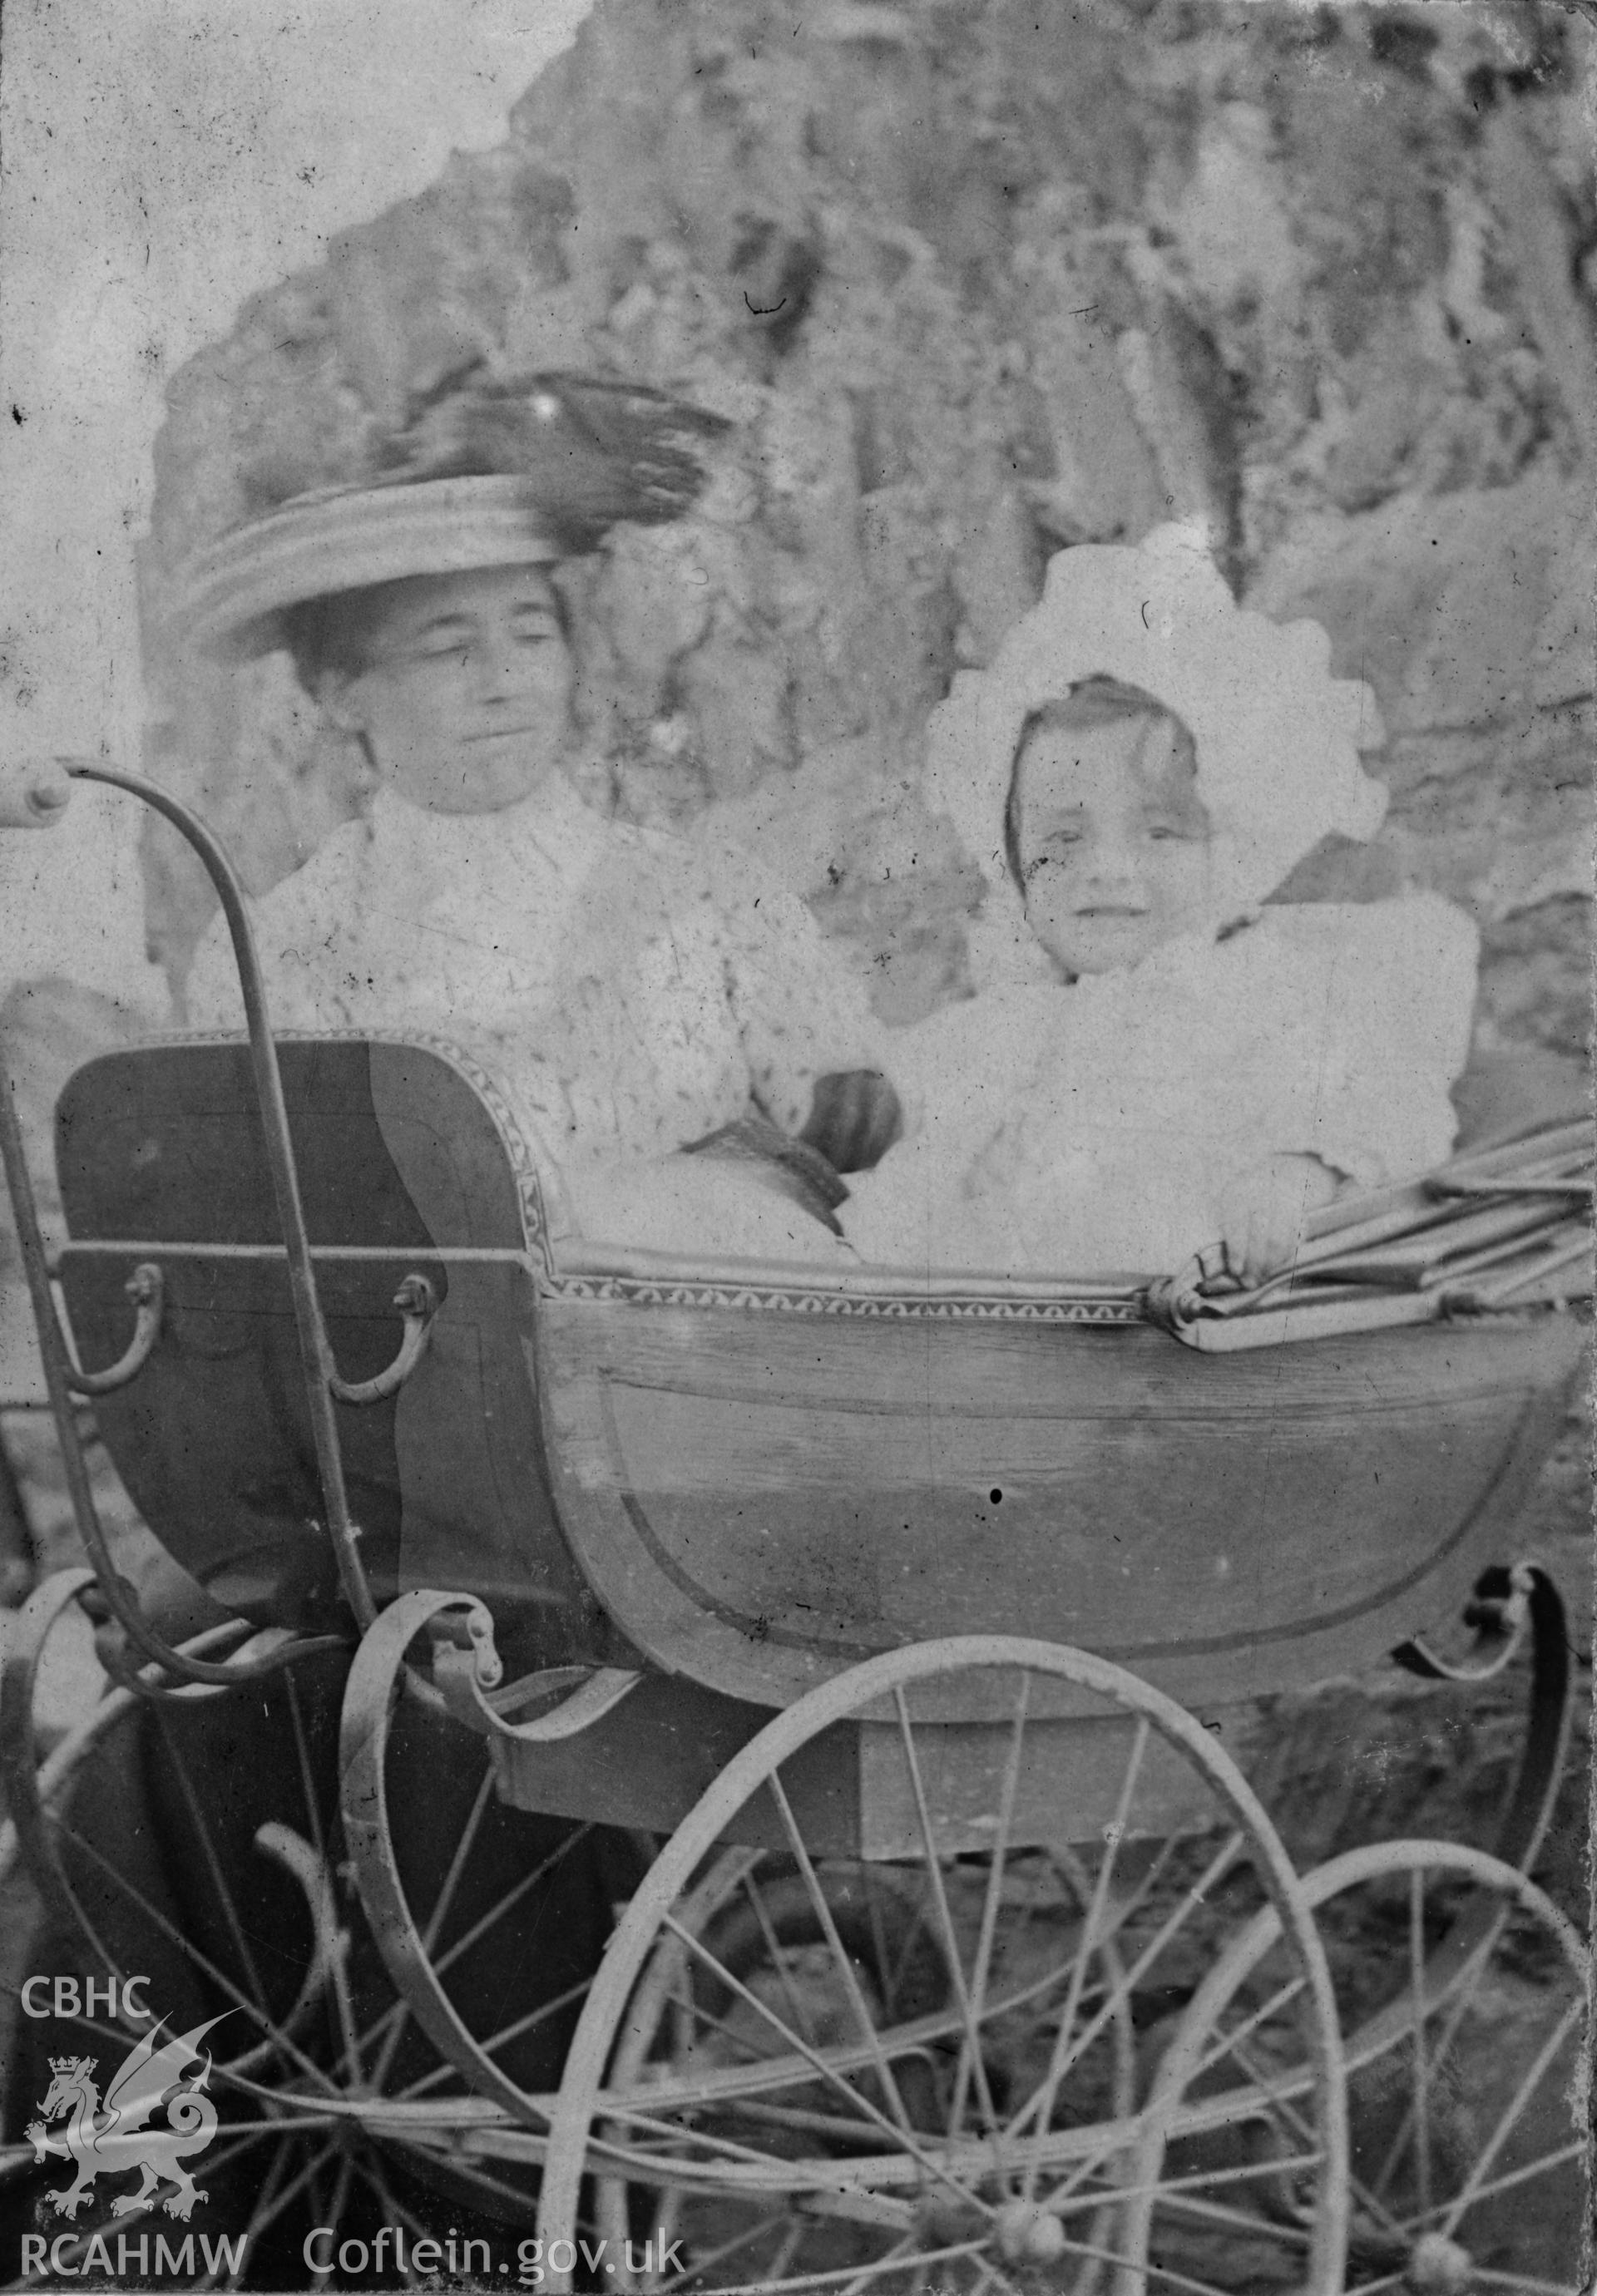 "On Castle grounds 1904'". Photo of adult and baby in a pram, digitised from a photograph album showing views of Aberystwyth and District, produced by David John Saer, school teacher of Aberystwyth. Loaned for copying by Dr Alan Chamberlain.